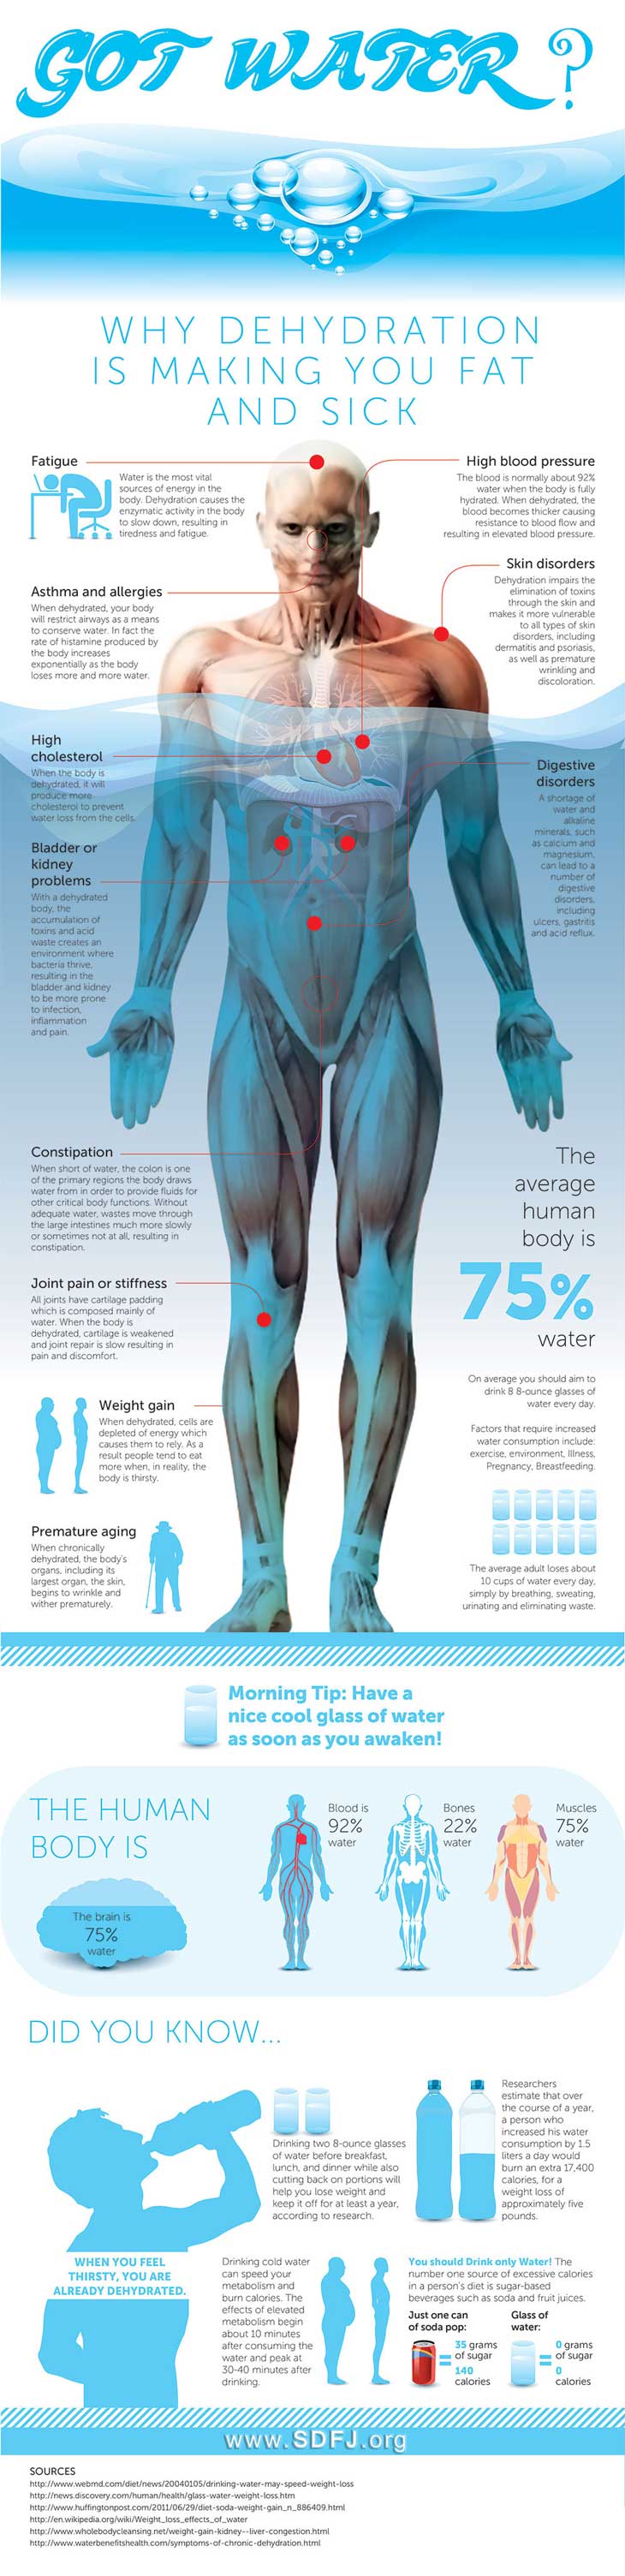 Different ways water helps keep the body in good working order.